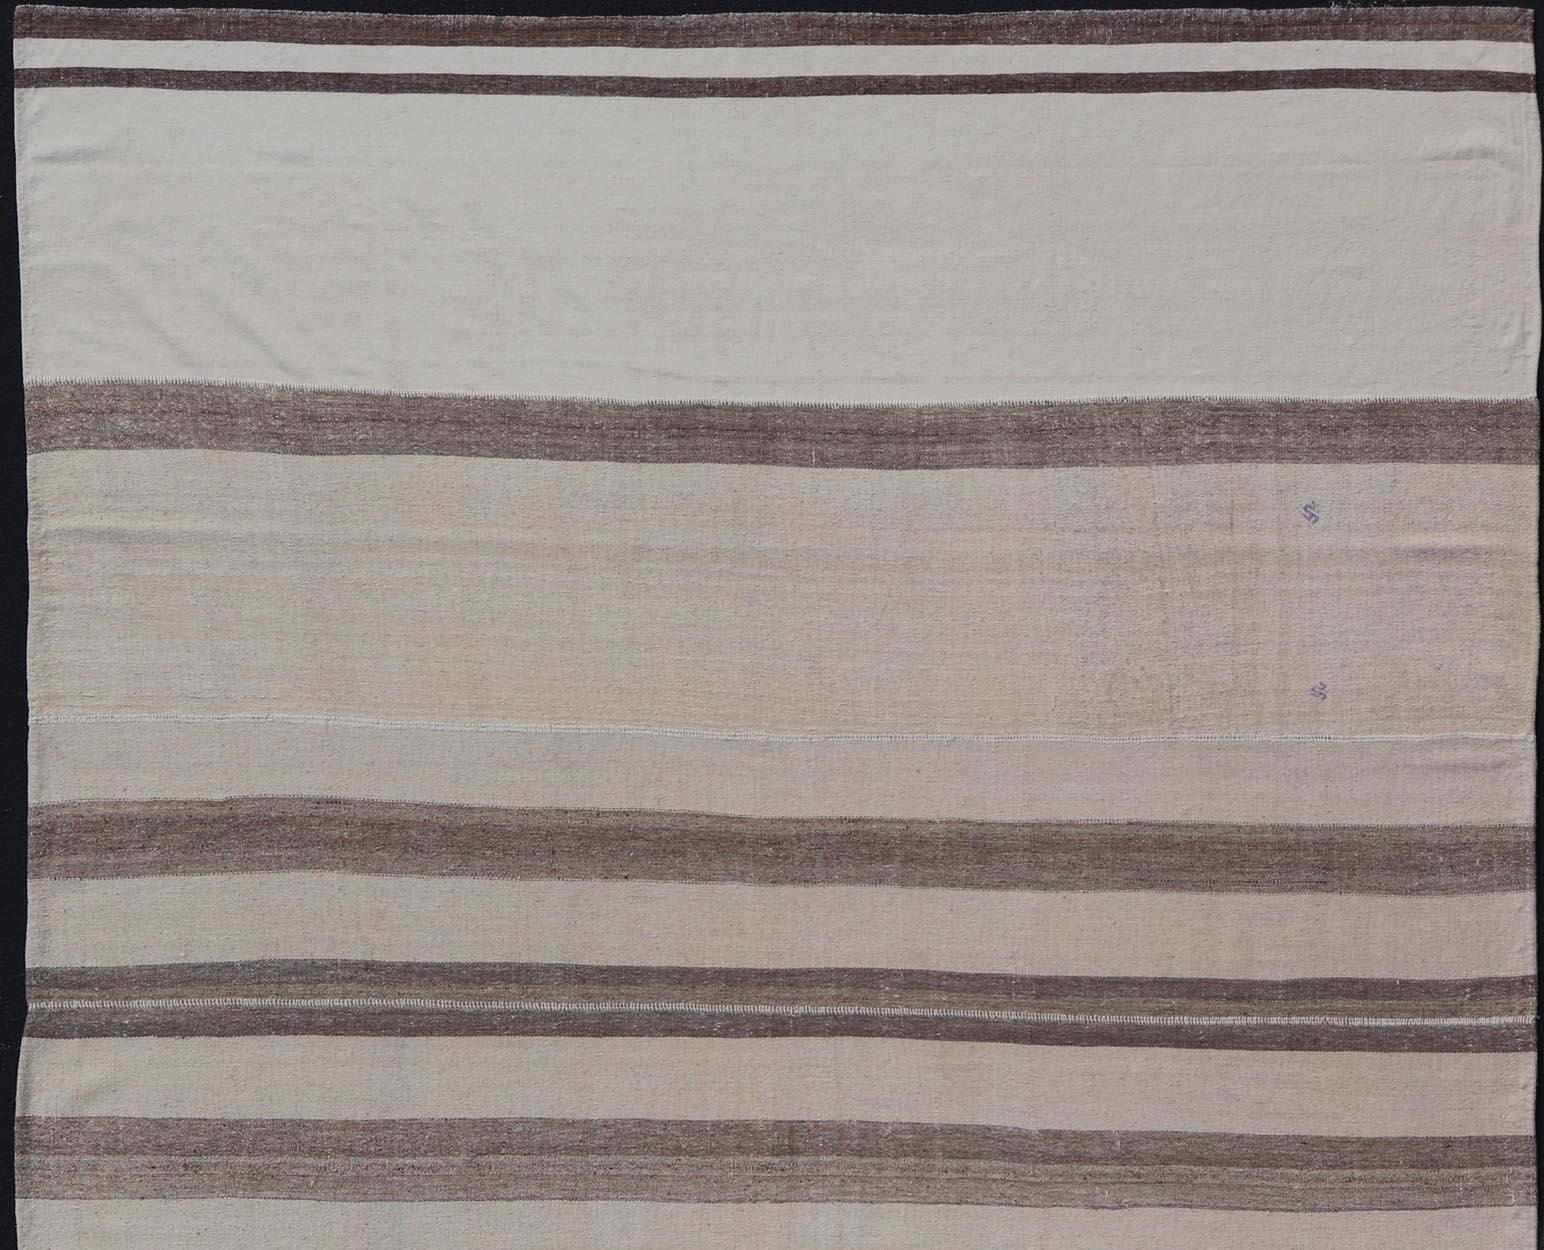 Flat-weave Kilim vintage rug from Turkey with stripes in brown, white, taupe, and cream Rug TU-NED-1003, country of origin / type: Turkey / Kilim, circa 1940.

Woven during the mid-20th century in Turkey, this multi paneled Kilim is decorated with a